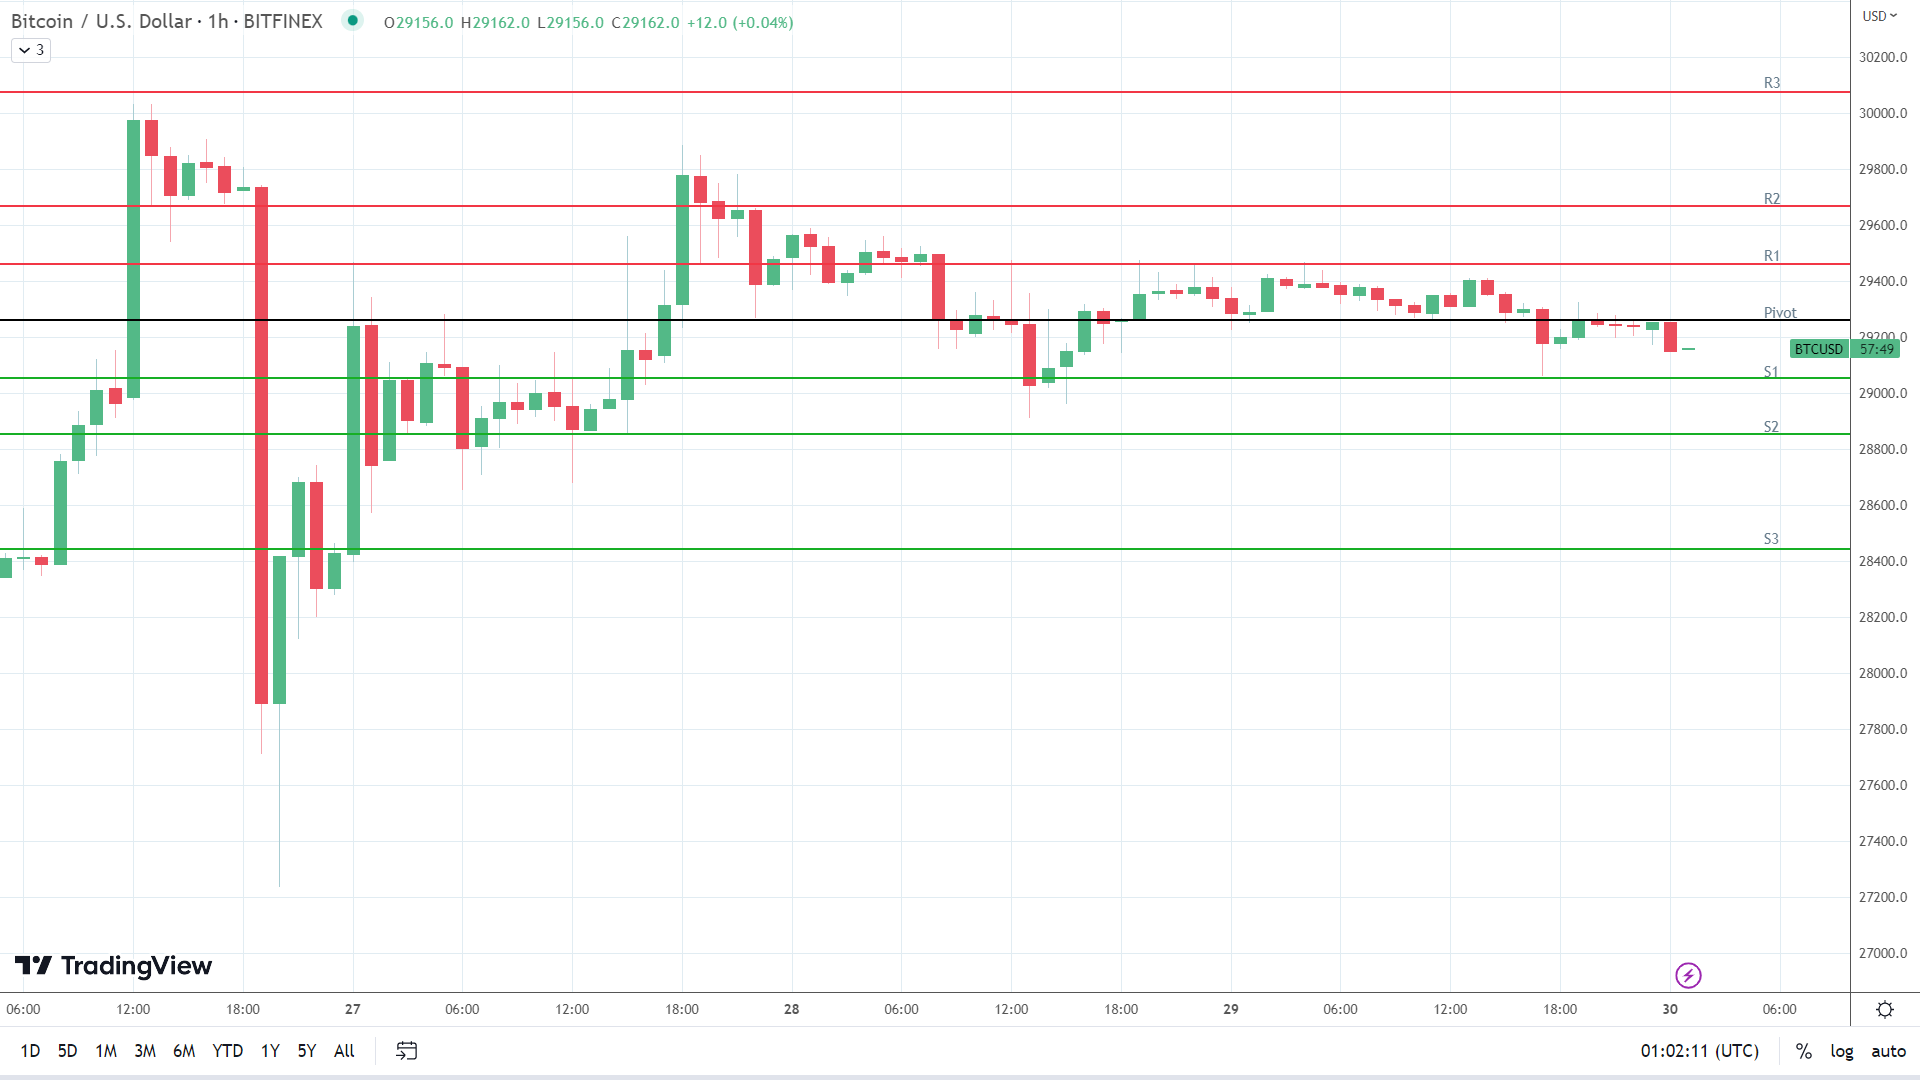 BTC support levels in play below the pivot.